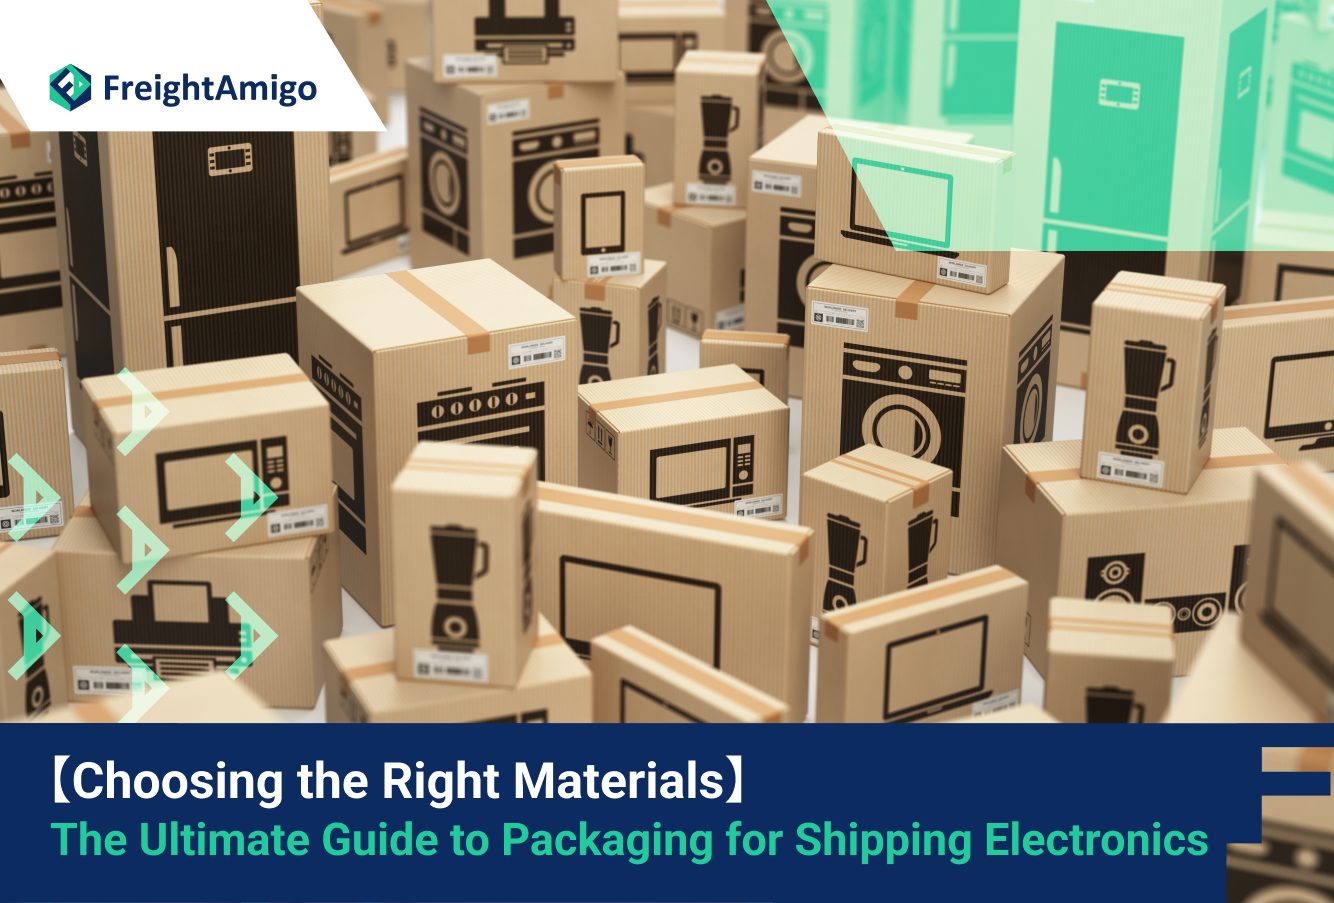 【Choosing the Right Materials】 The Ultimate Guide to Packaging for Shipping Electronics